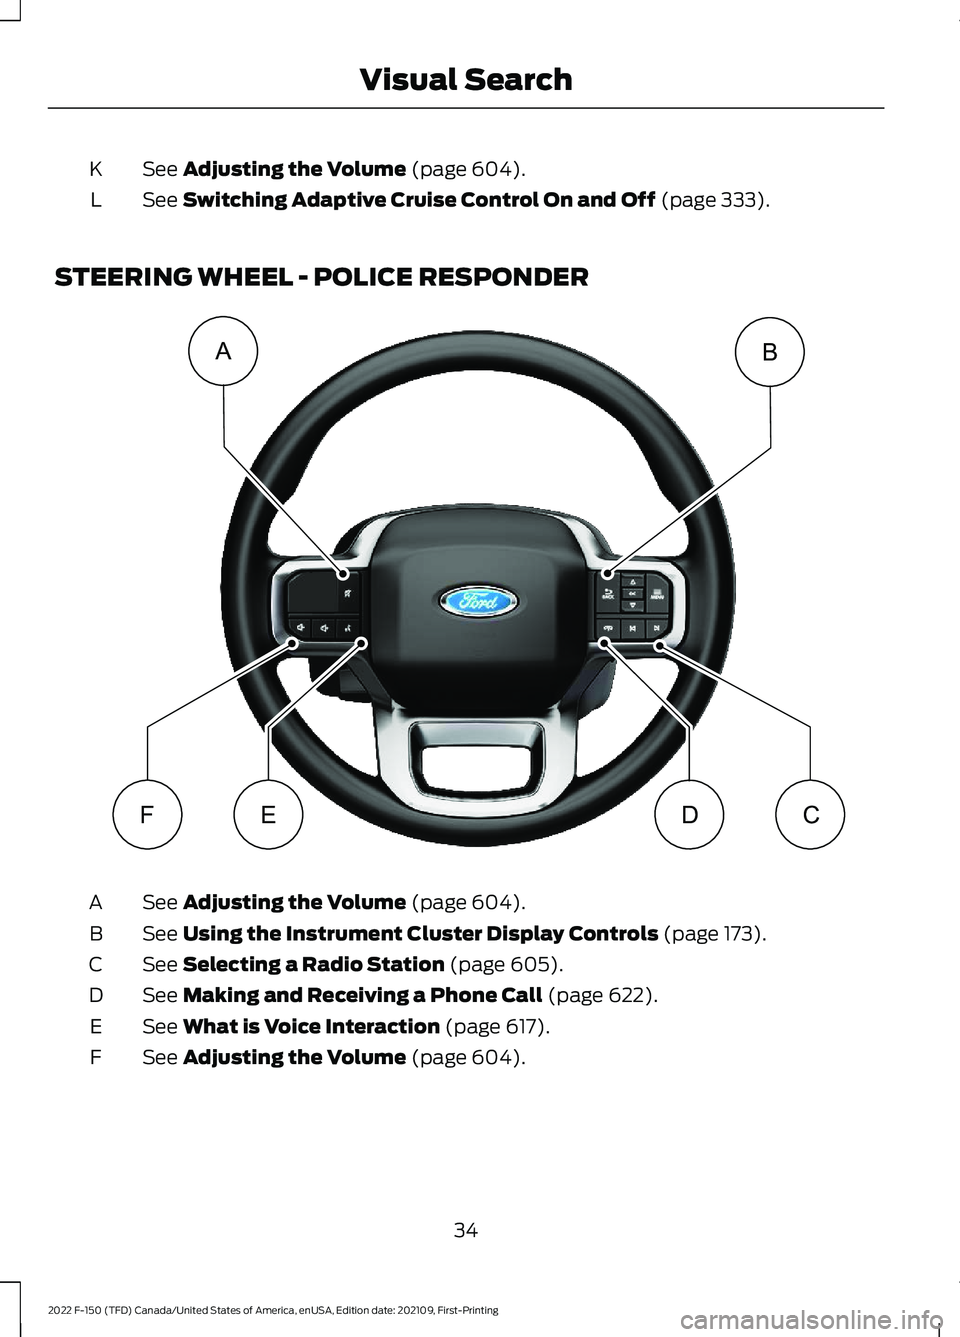 FORD F-150 2022  Owners Manual See Adjusting the Volume (page 604).
K
See 
Switching Adaptive Cruise Control On and Off (page 333).
L
STEERING WHEEL - POLICE RESPONDER See 
Adjusting the Volume (page 604).
A
See 
Using the Instrume